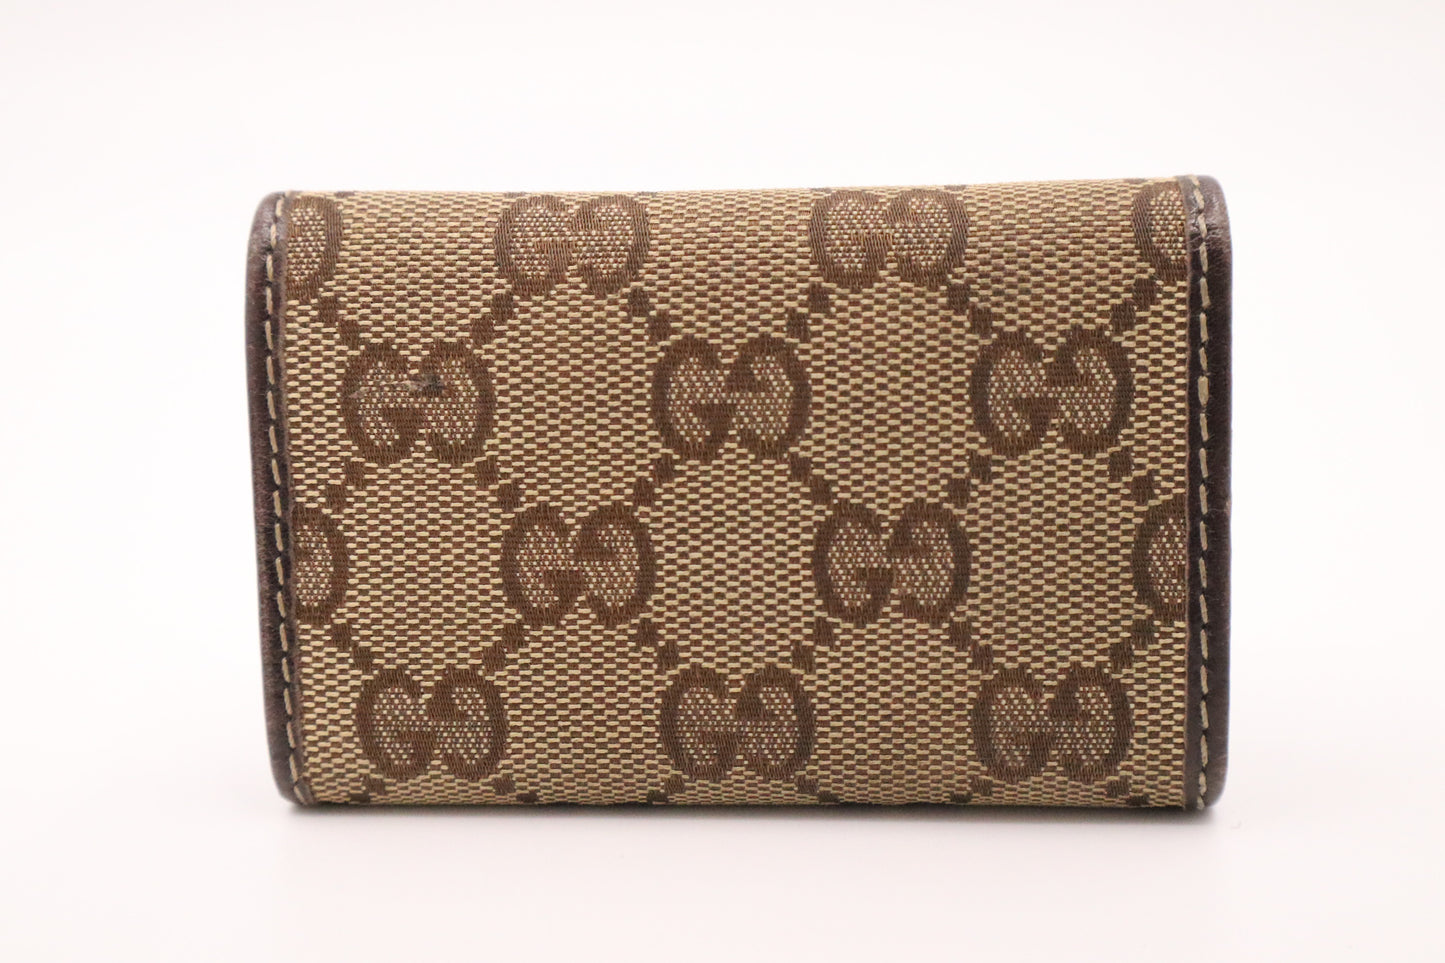 Gucci 4 Key Case in GG Canvas & Brown Leather